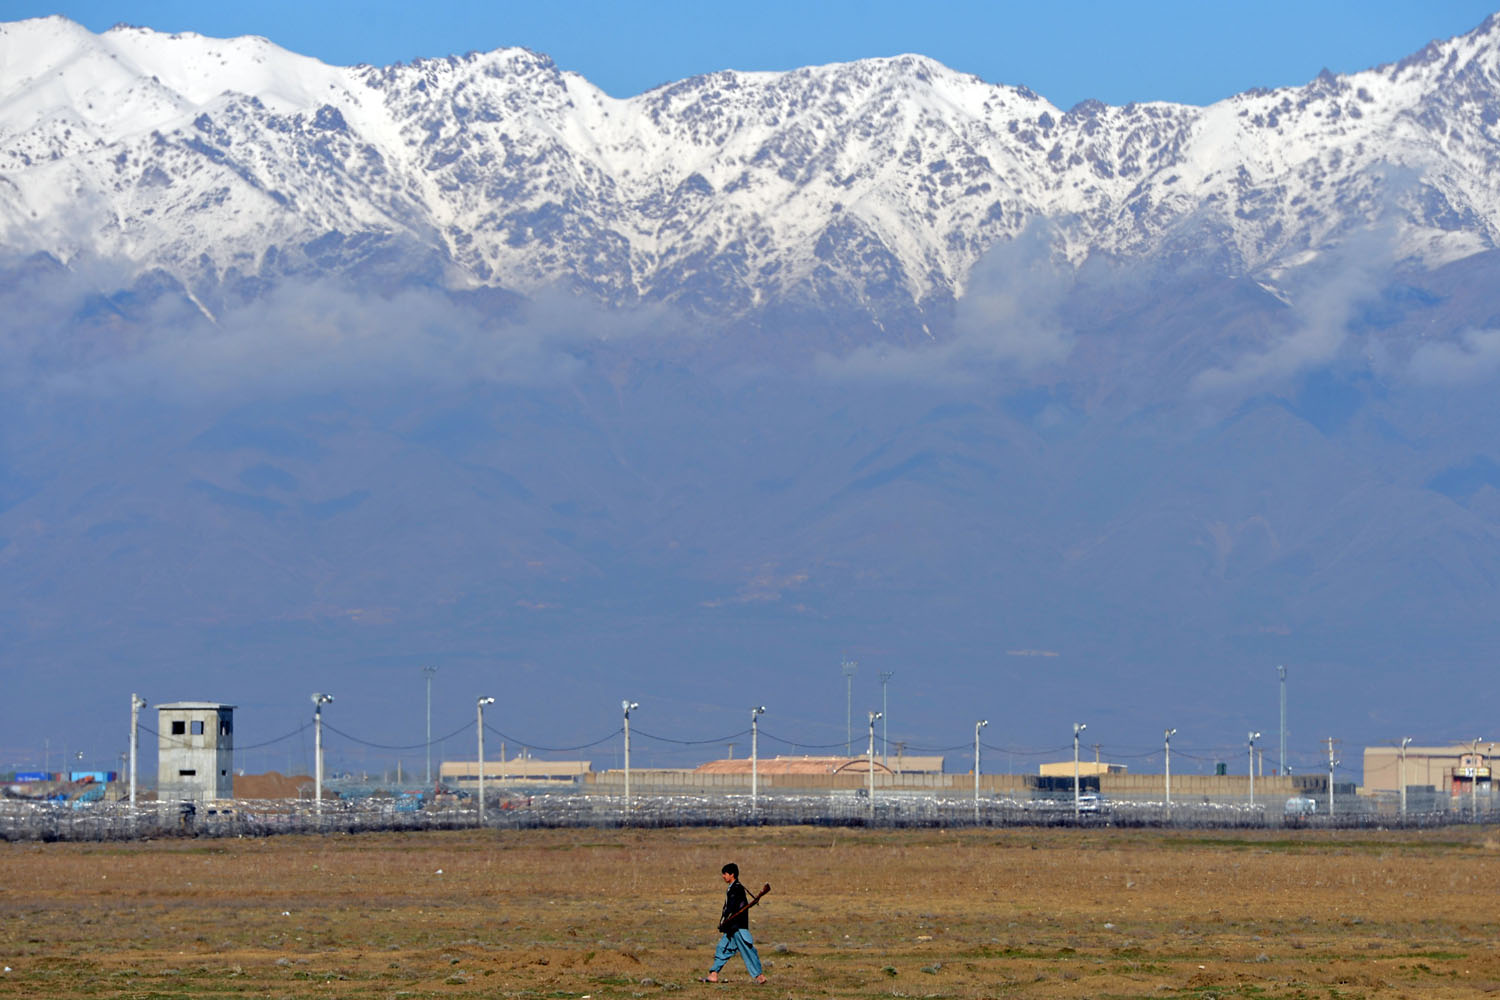 March 25, 2013. An Afghan man carries an old gun as he walks past Bagram Prison facilities outside Kabul. Afghanistan on Monday took full control of Bagram prison from the United States, healing one running sore in their testy relationship as US-led forces wind down more than a decade of war.